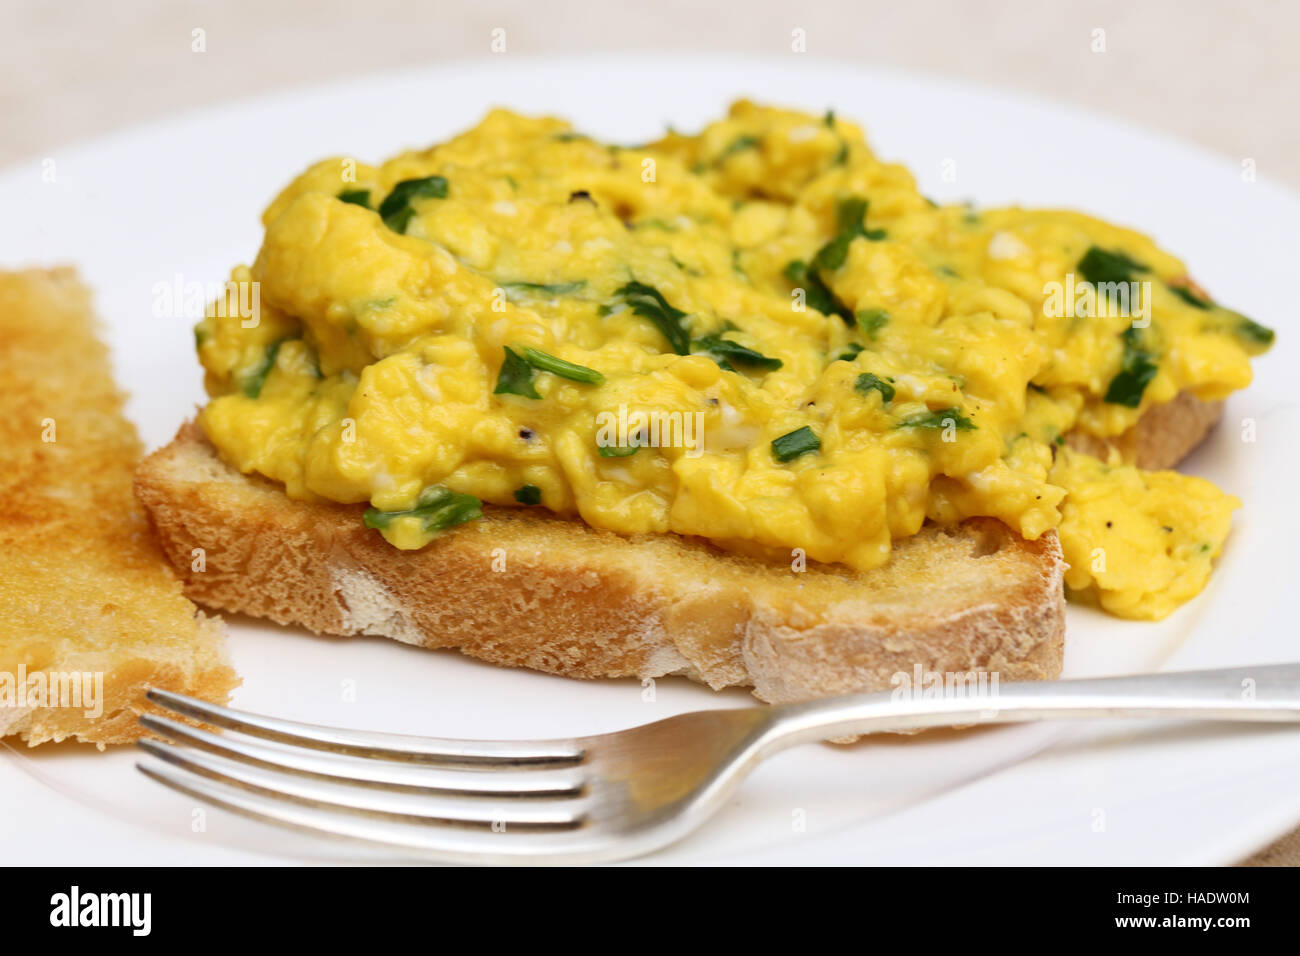 A light meal of scrambled egg cooked with baby spinach leaves served on toast Stock Photo